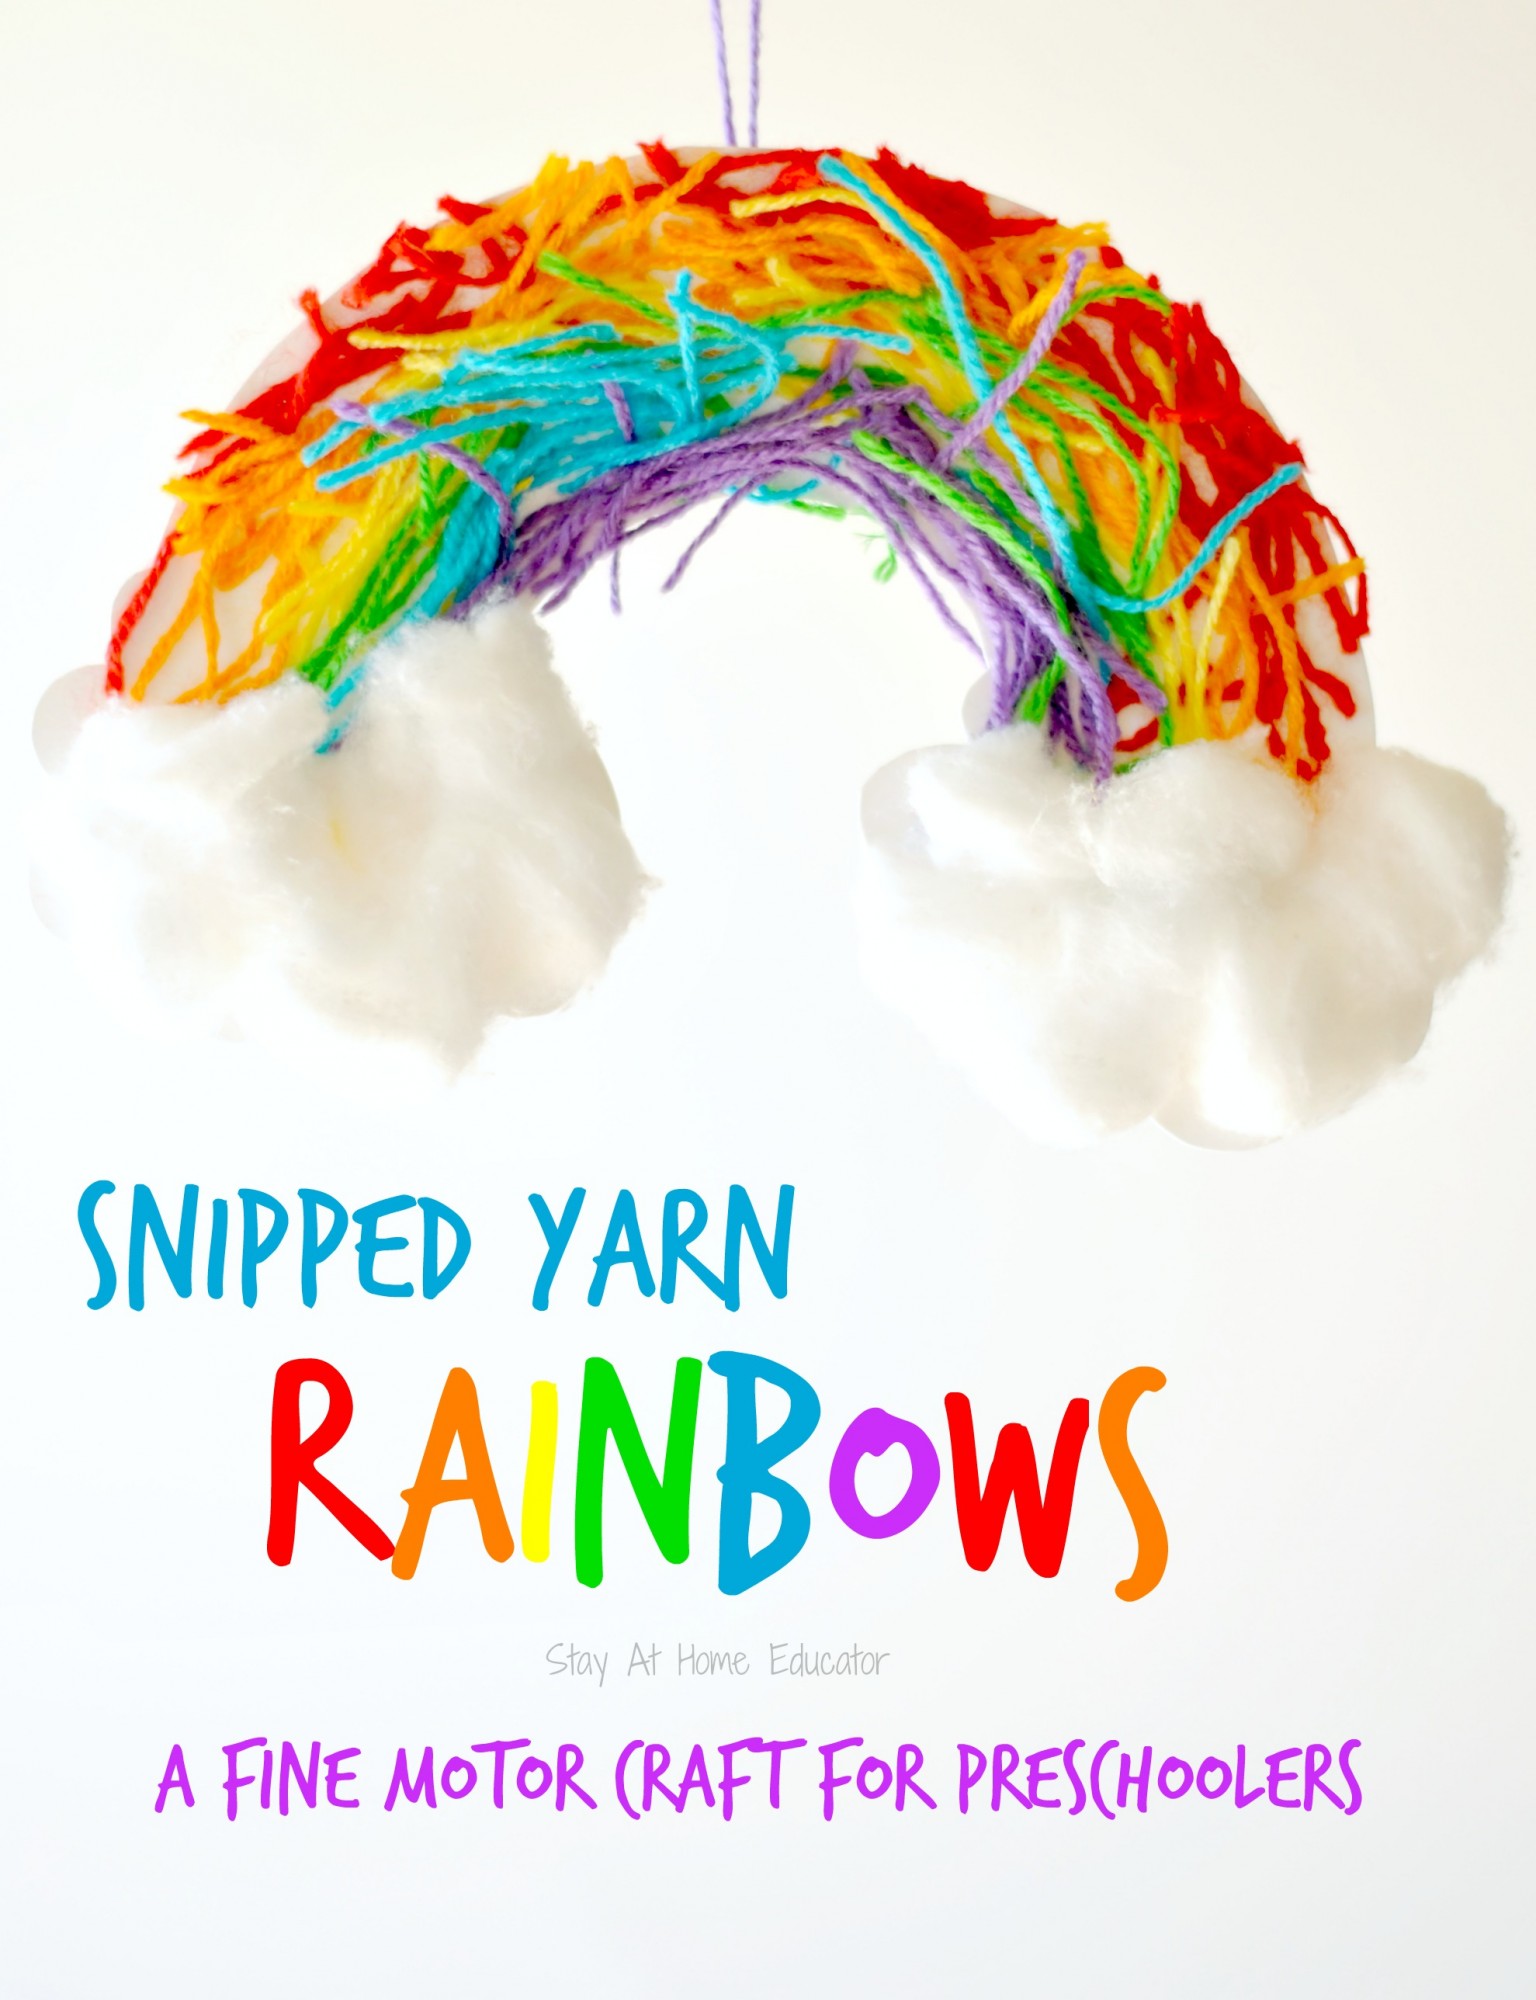 Snipped yarn rainbows, a fine motor craft for preschoolers - Stay At Home Educator